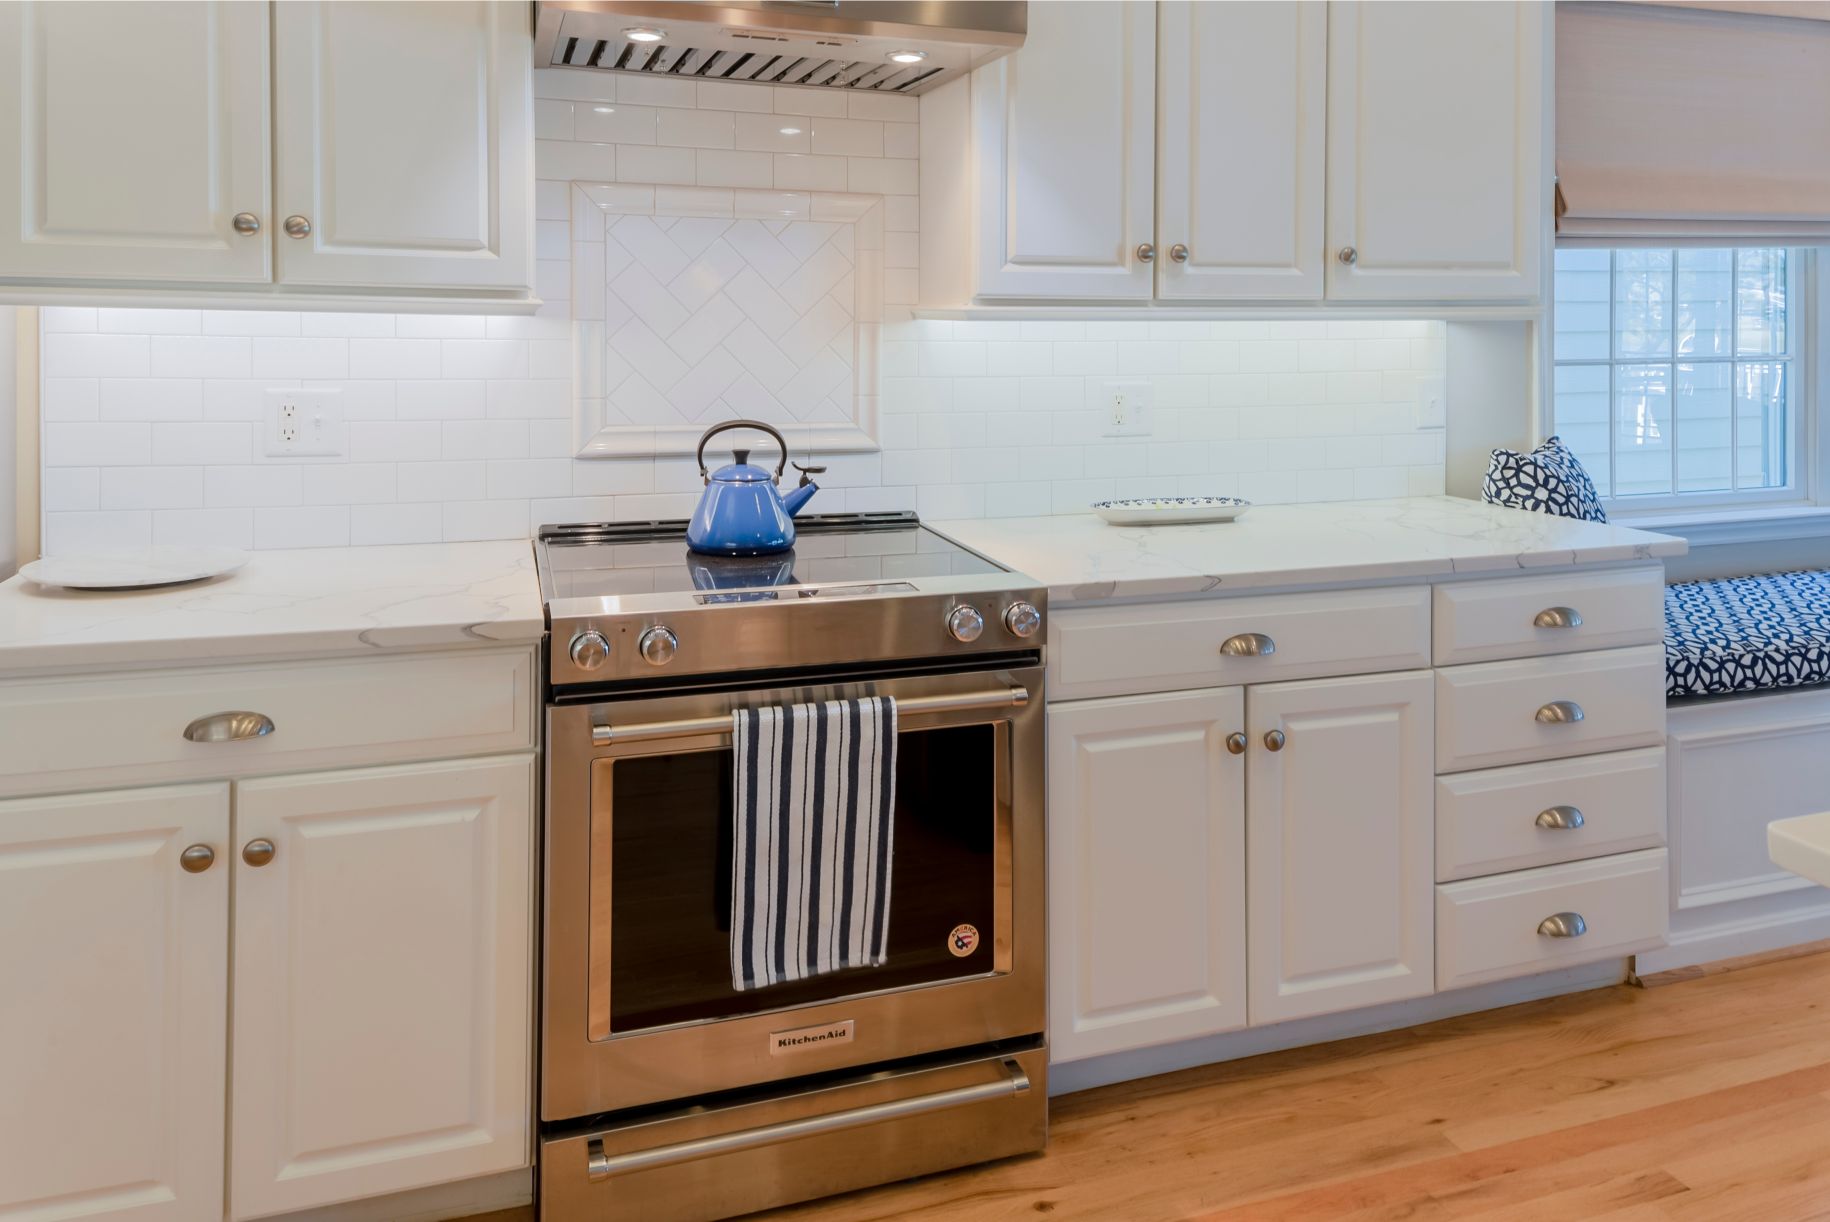 Kitchen Remodel in Willow Oak, Ocean View DE with Brushed Stainless Steel Oven